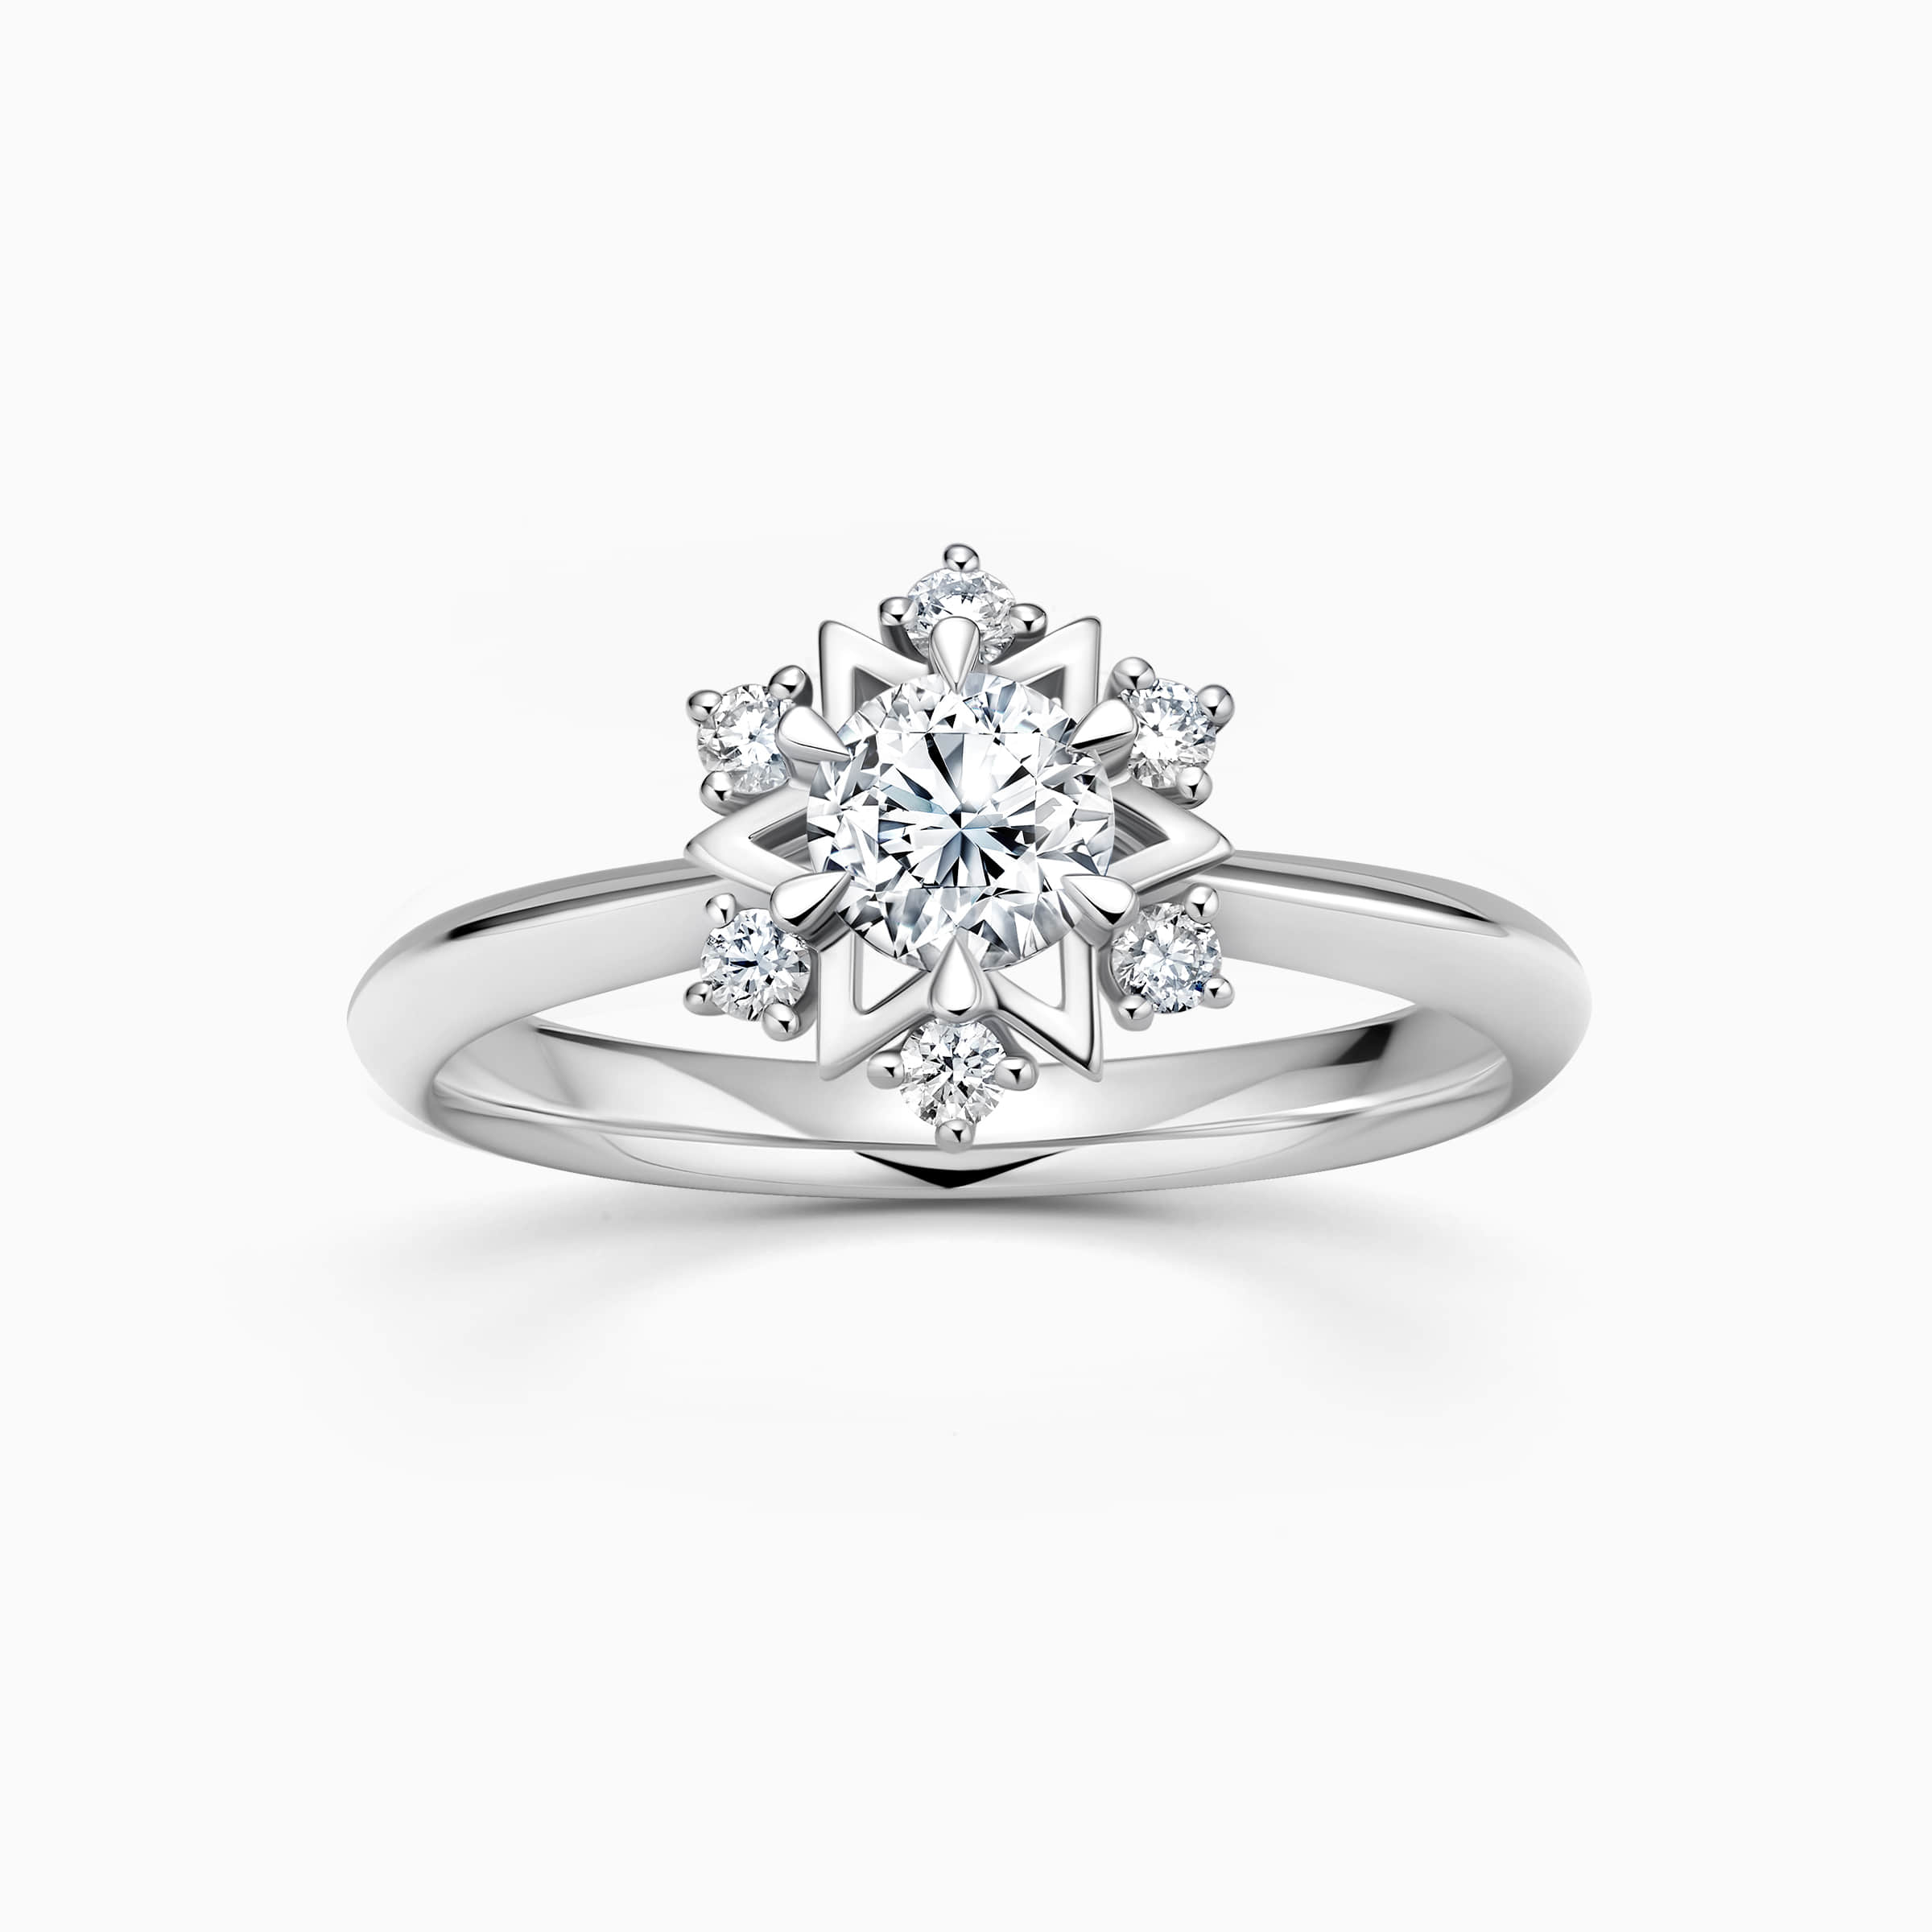 Darry Ring star engagement ring white gold